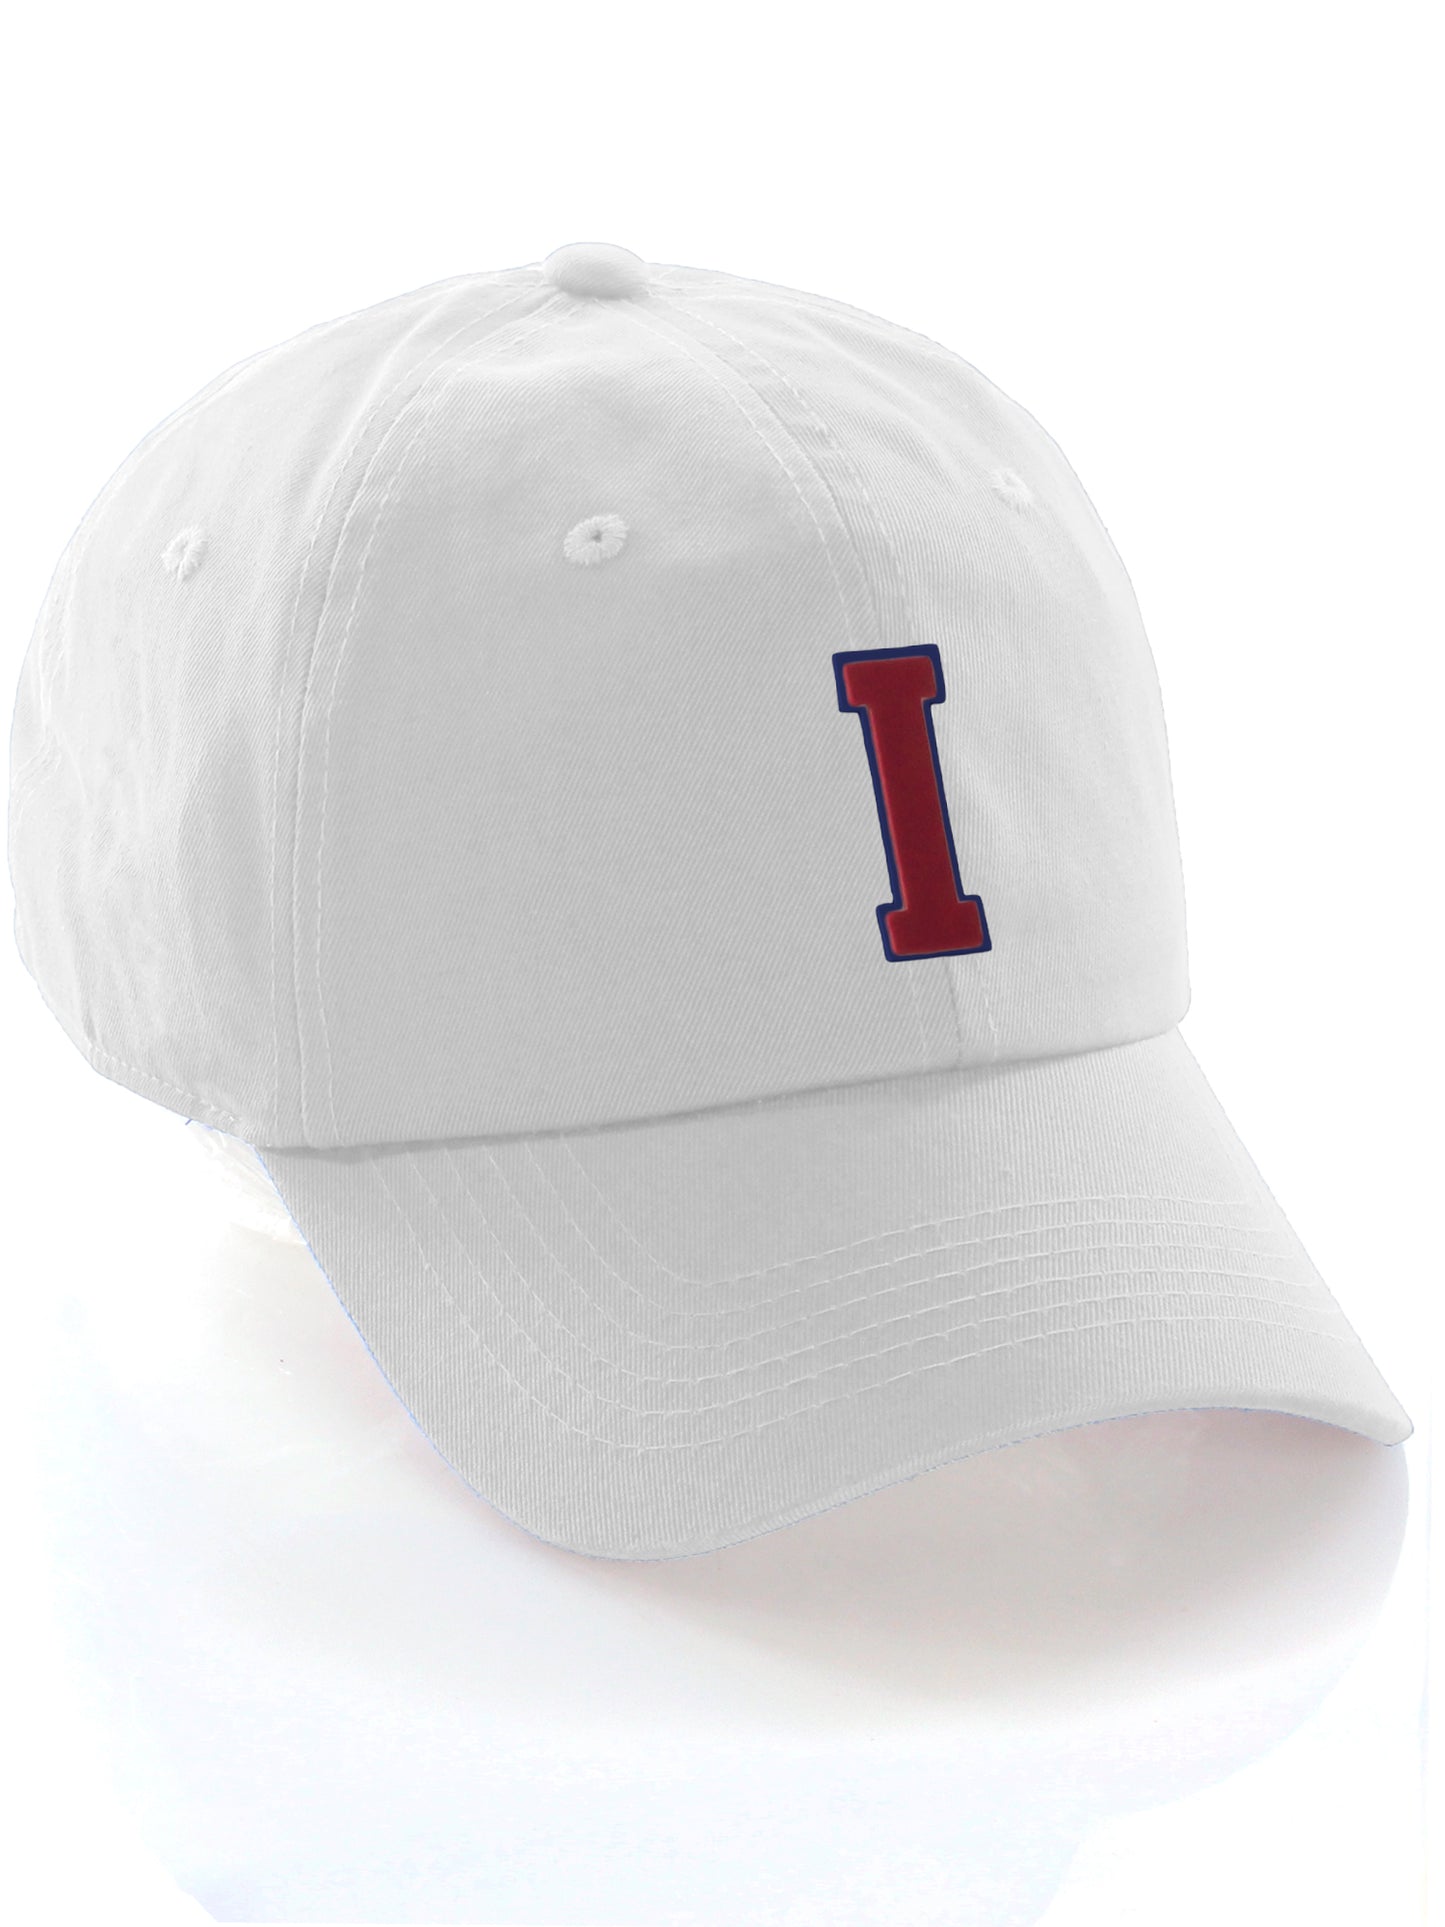 I&W Hatgear Customized Letter Initial Baseball Hat A to Z Team Colors, White Cap Blue Red